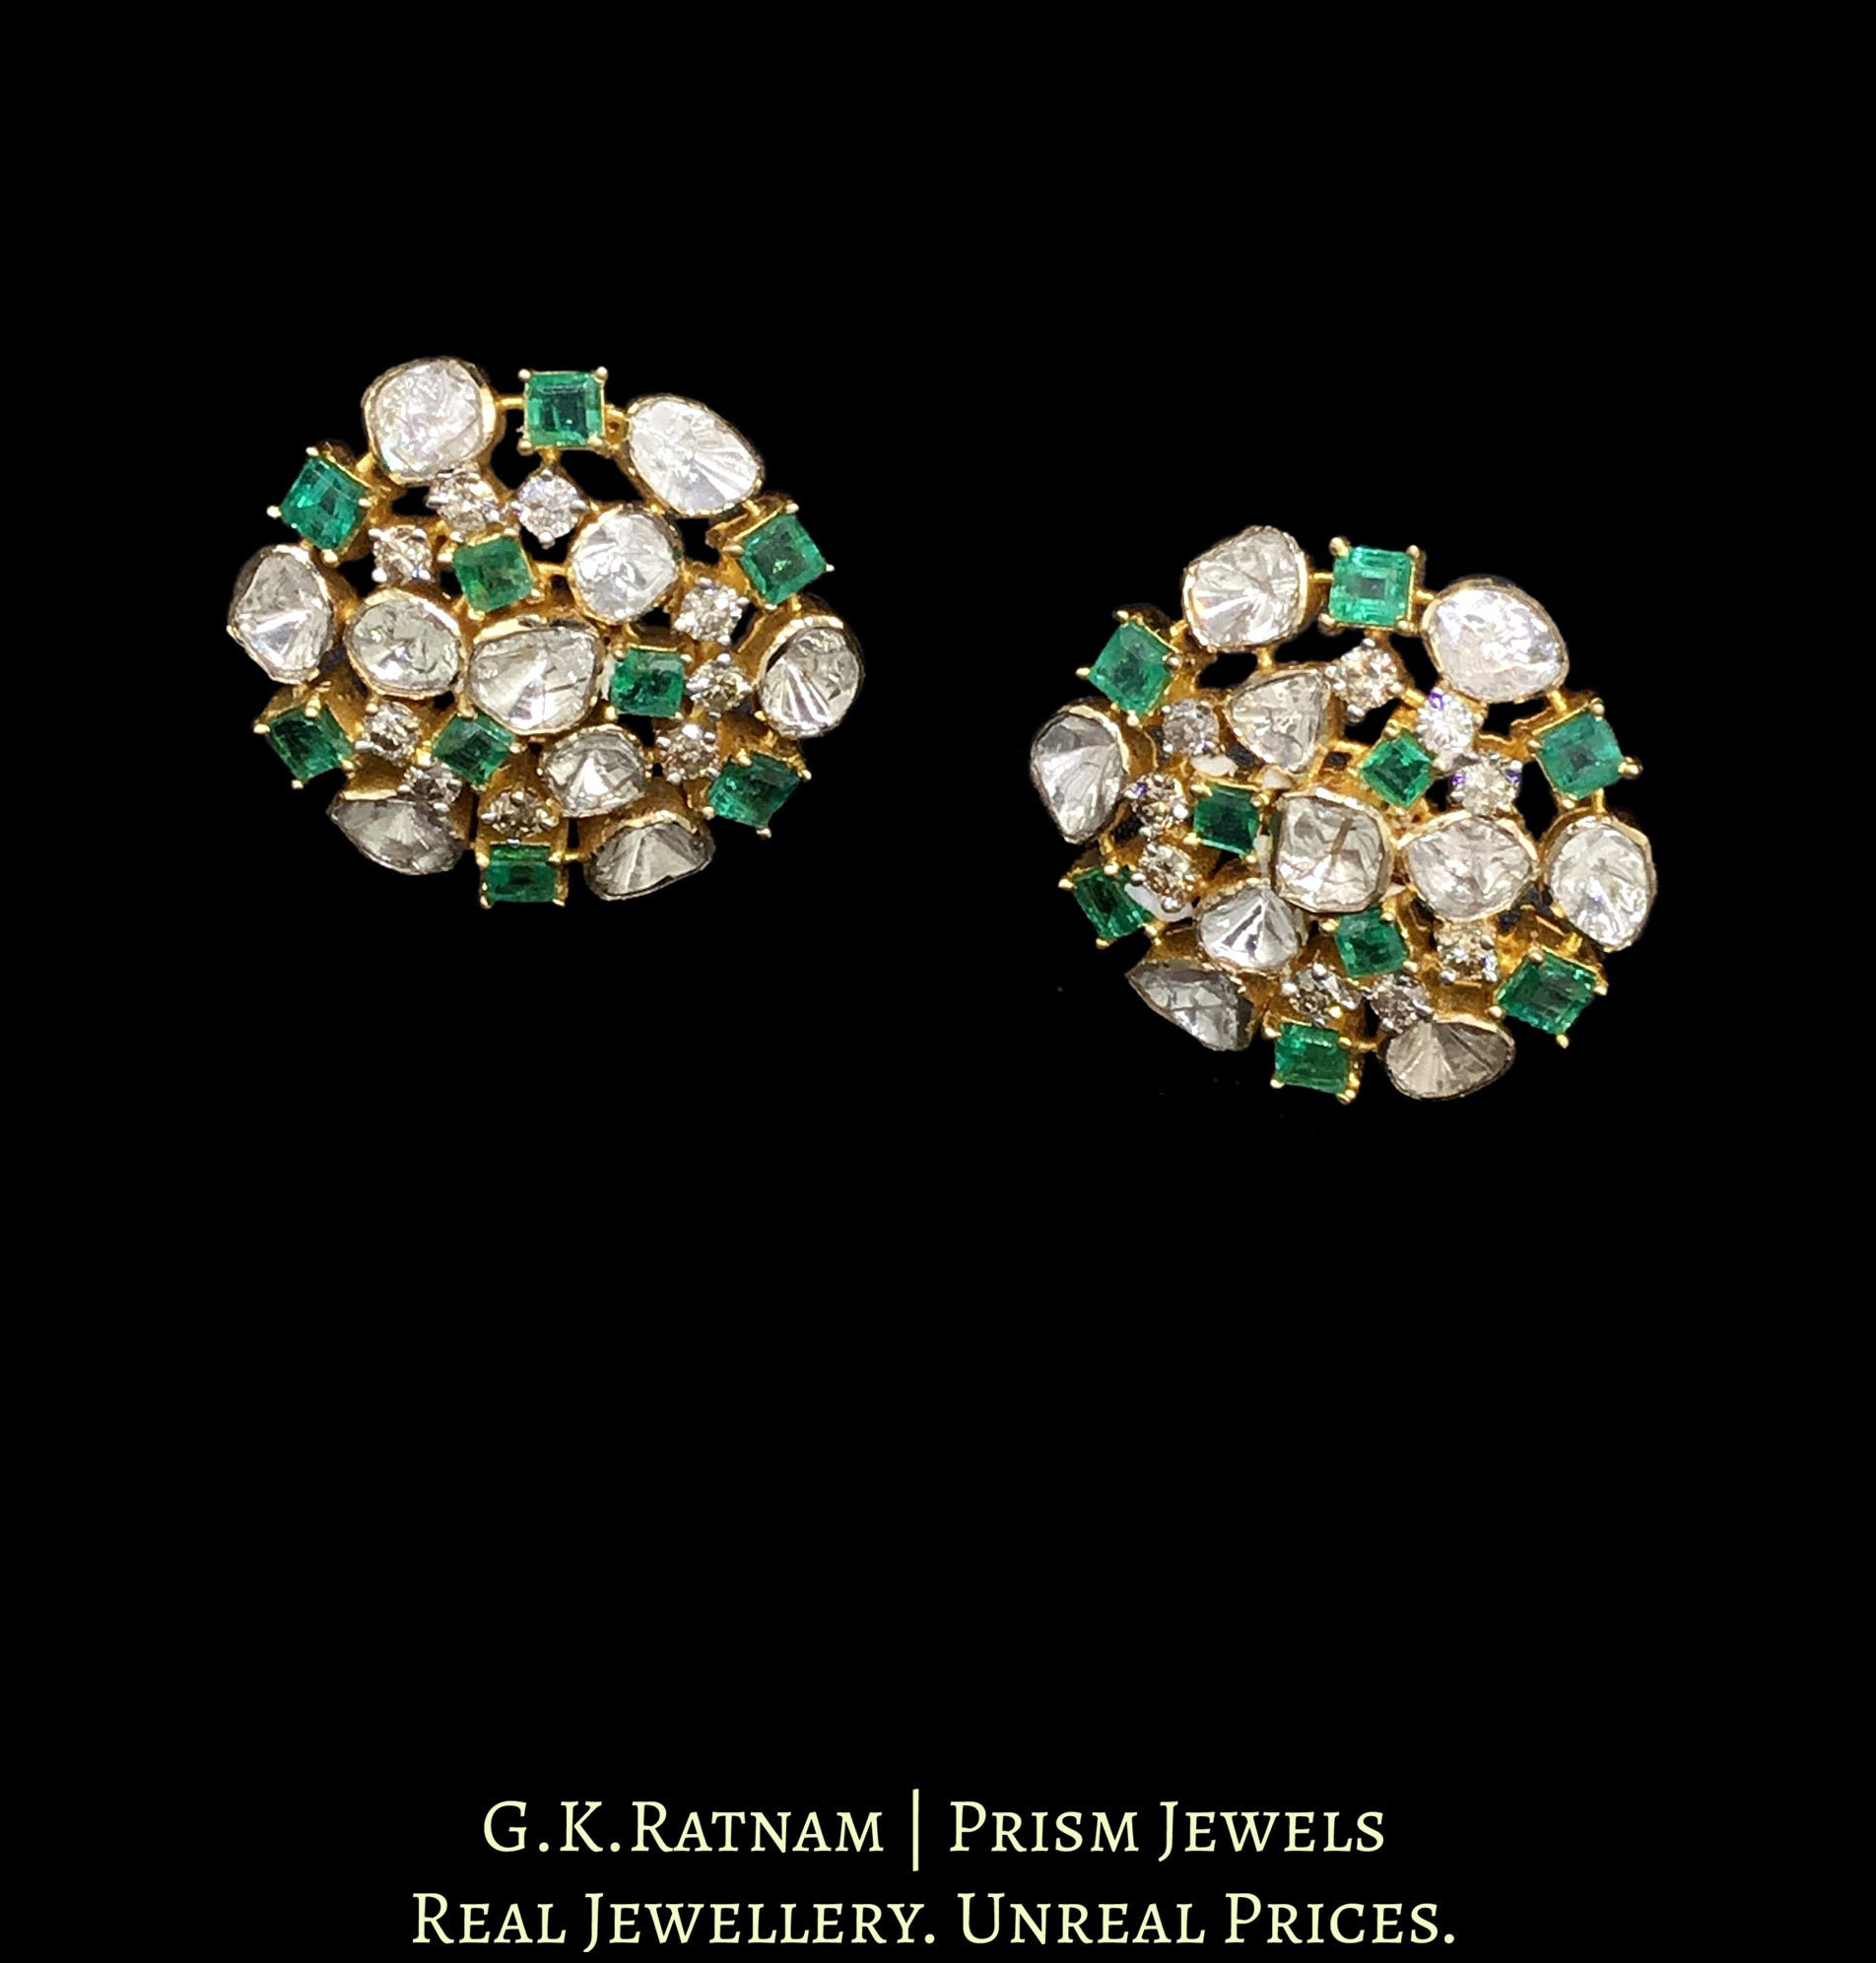 14k Gold and Diamond Polki Open Setting Karanphool Earring Pair with Natural Emerald Chawkis (squares)